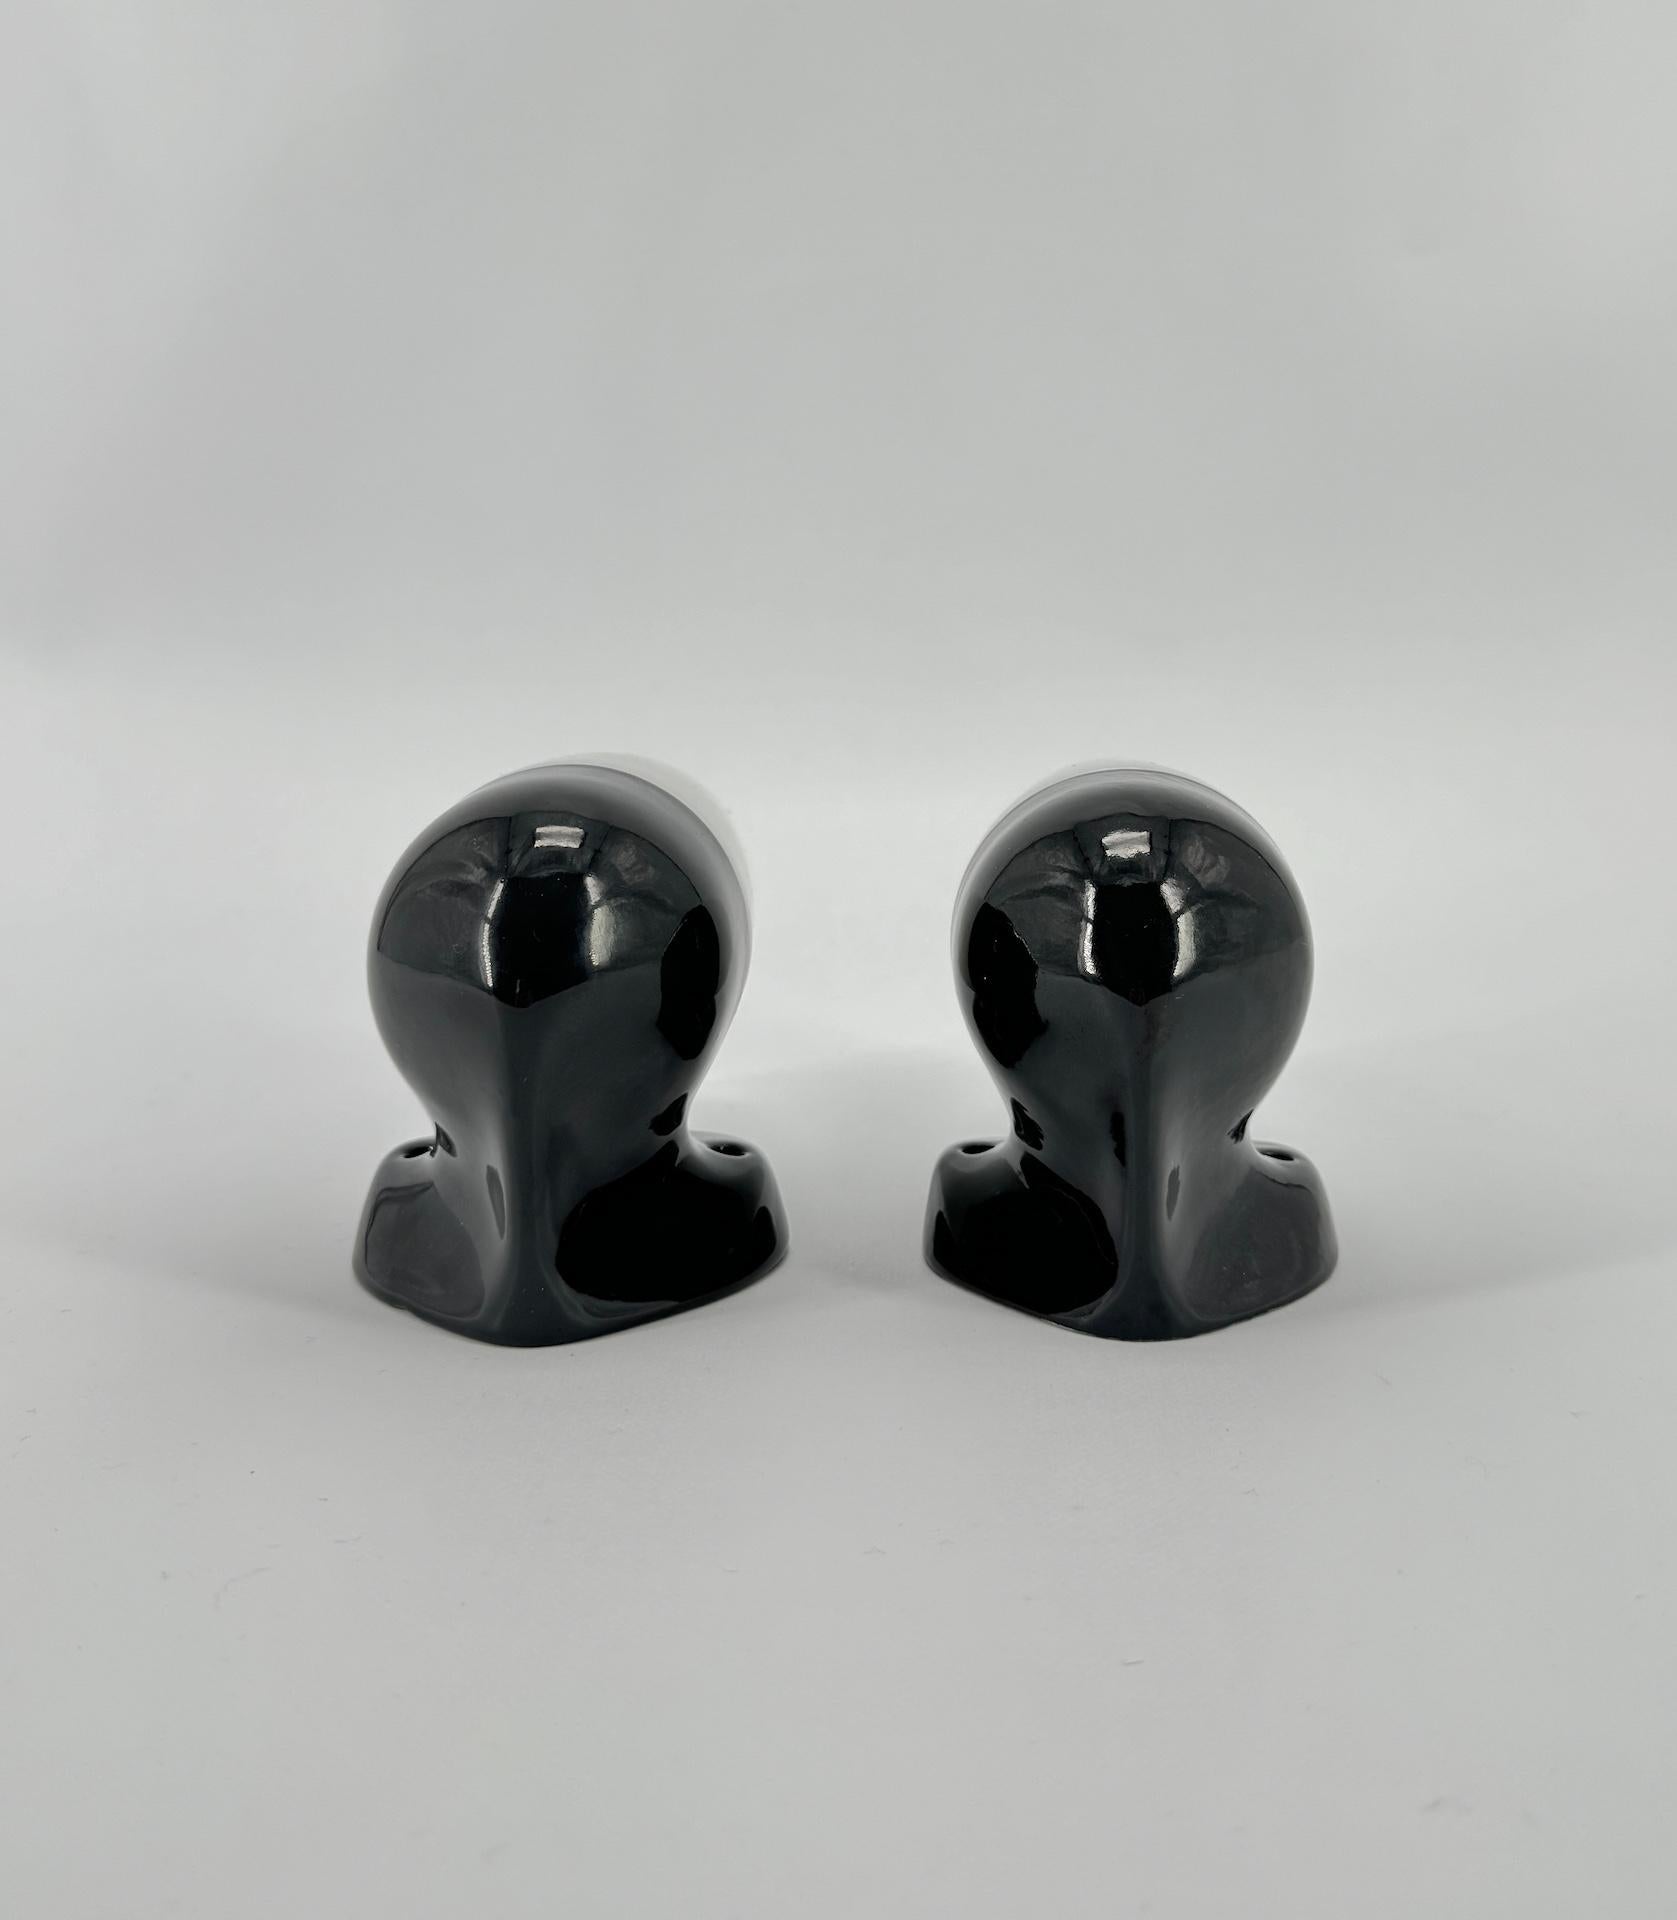 Mid-Century Modern Pair of Black Ceramic and Opaline Wall Lamp By Wilhelm Wagenfeld For Lindner